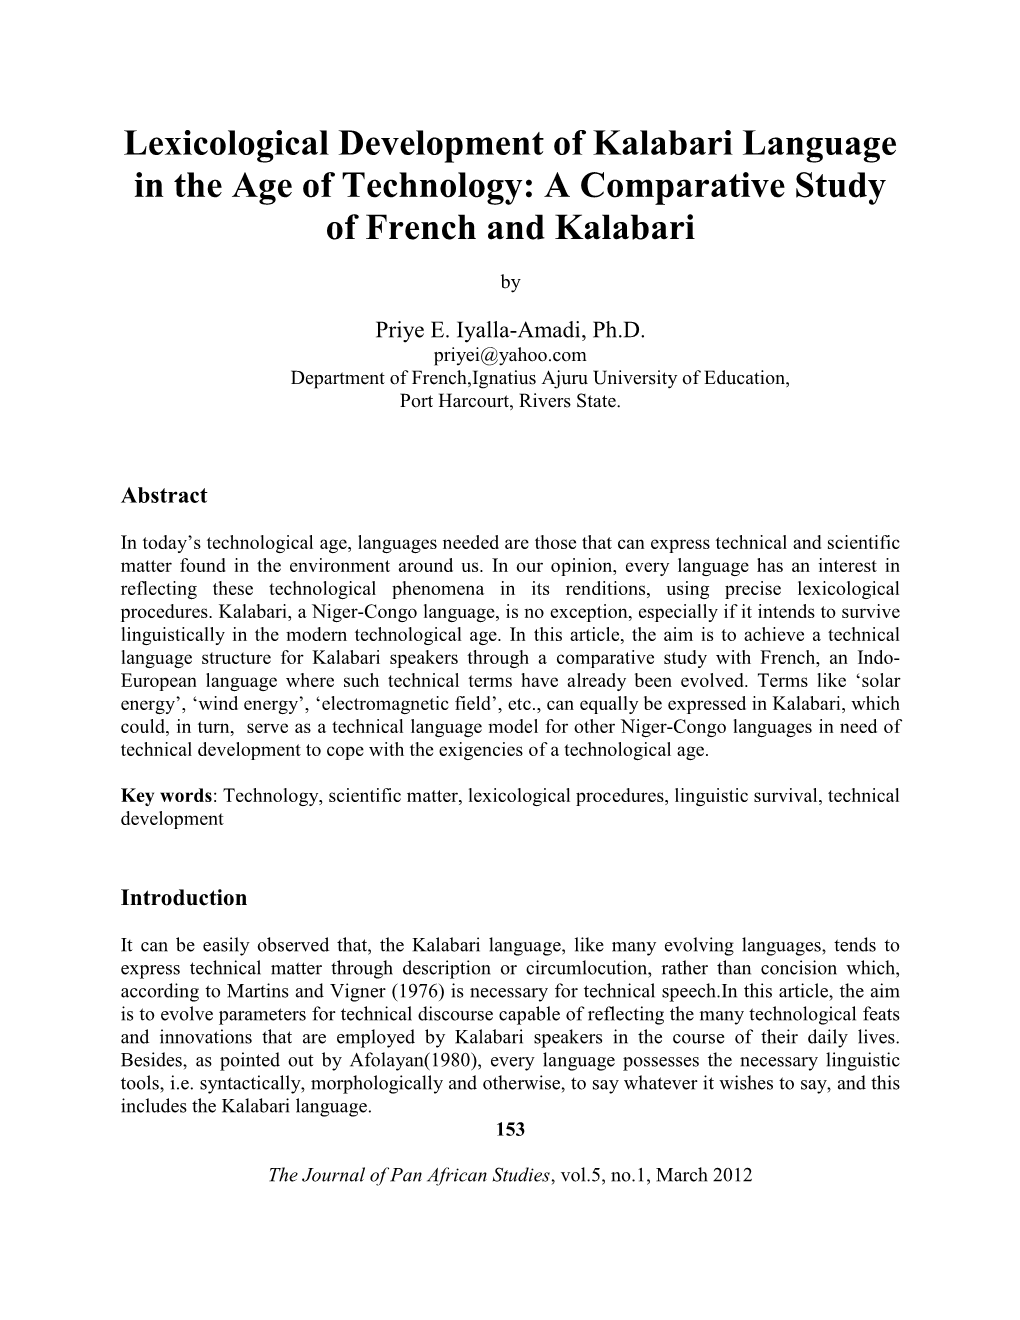 Lexicological Development of Kalabari Language in the Age of Technology: a Comparative Study of French and Kalabari